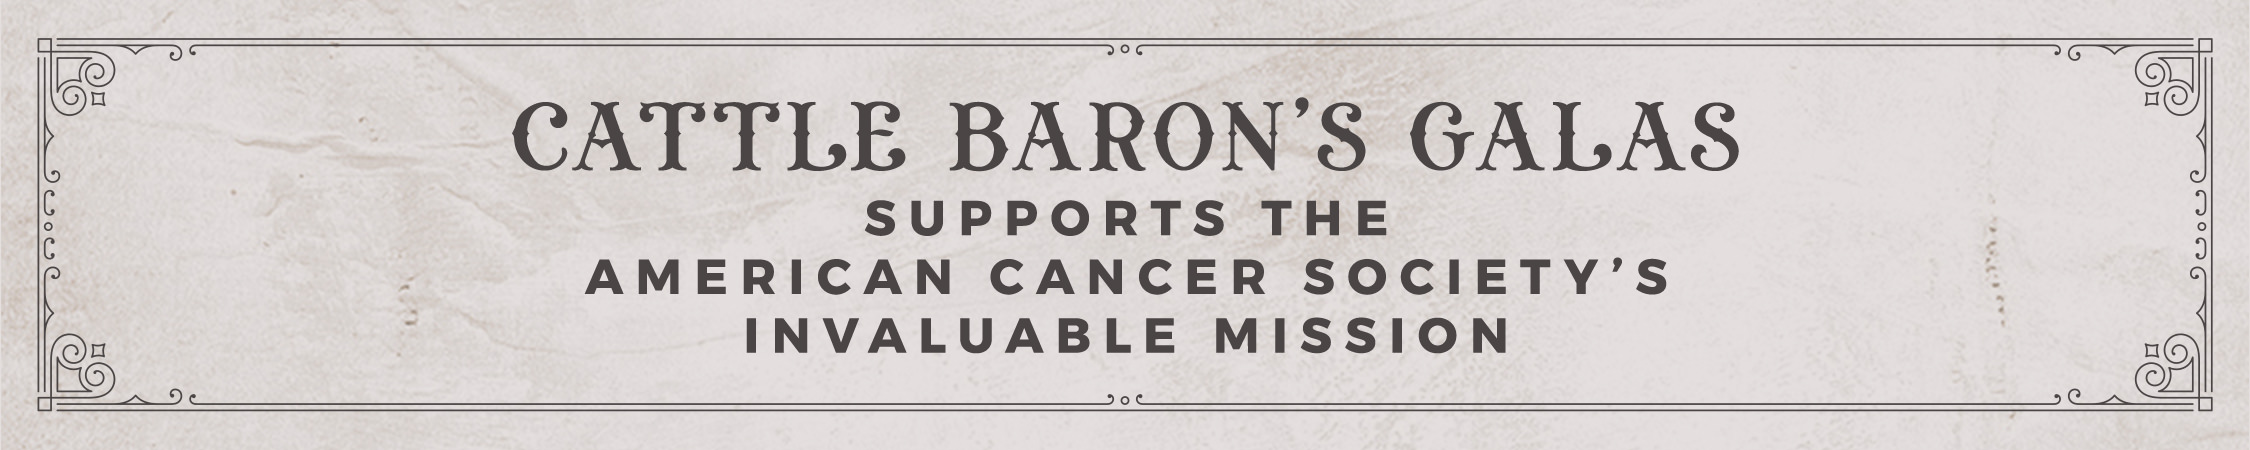 Cattle Baron's Galas Support the American Cancer Society Banner